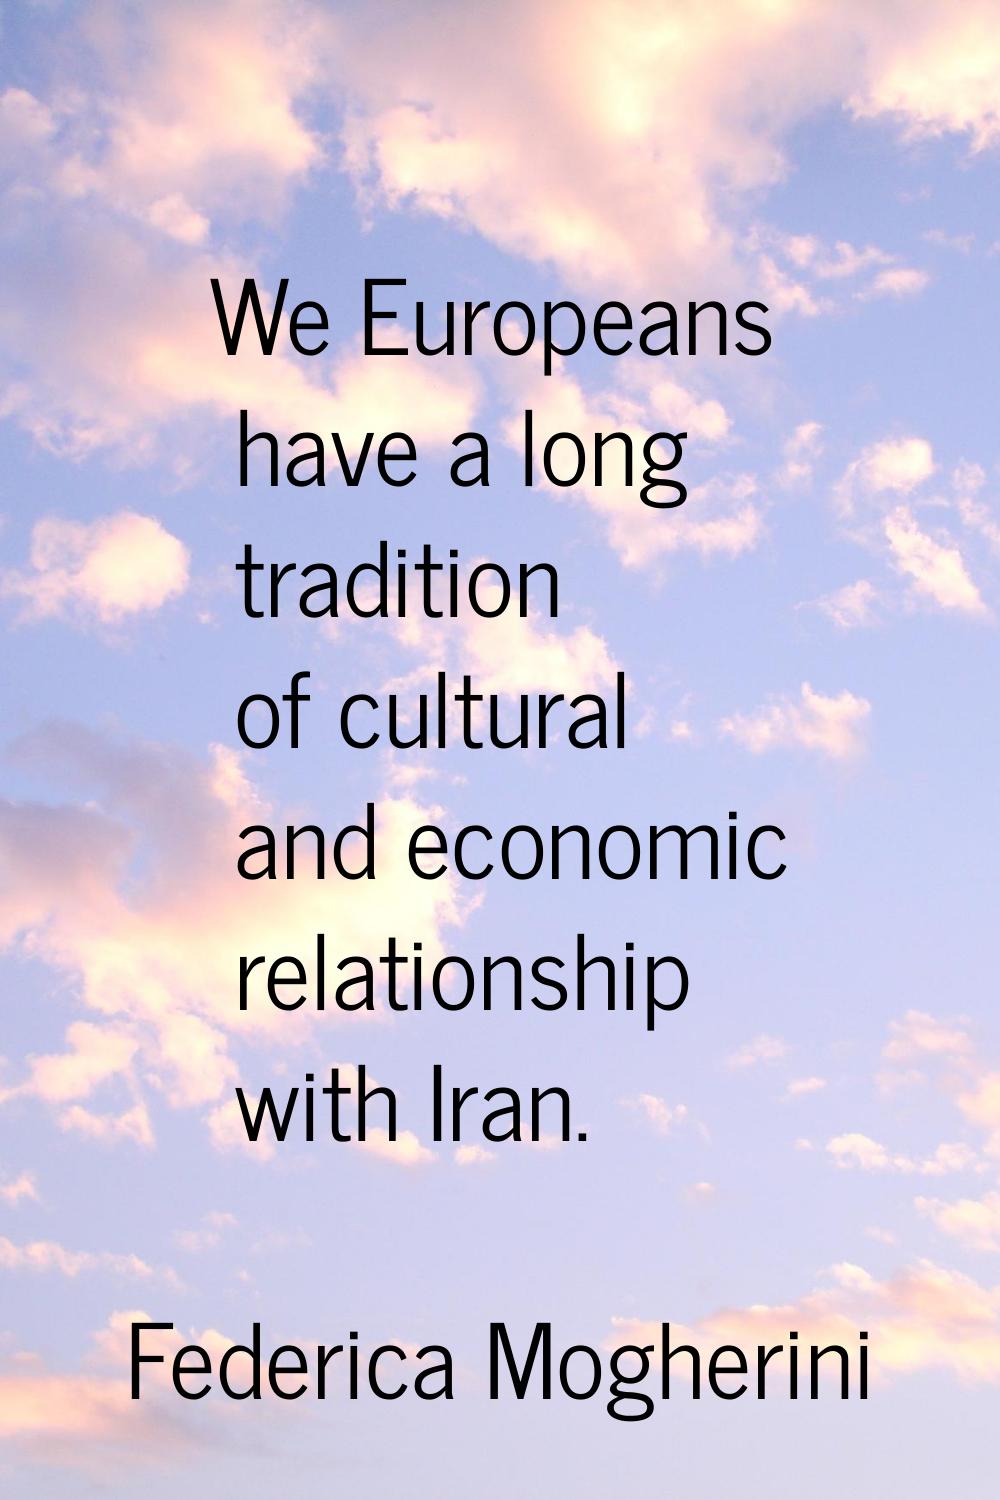 We Europeans have a long tradition of cultural and economic relationship with Iran.